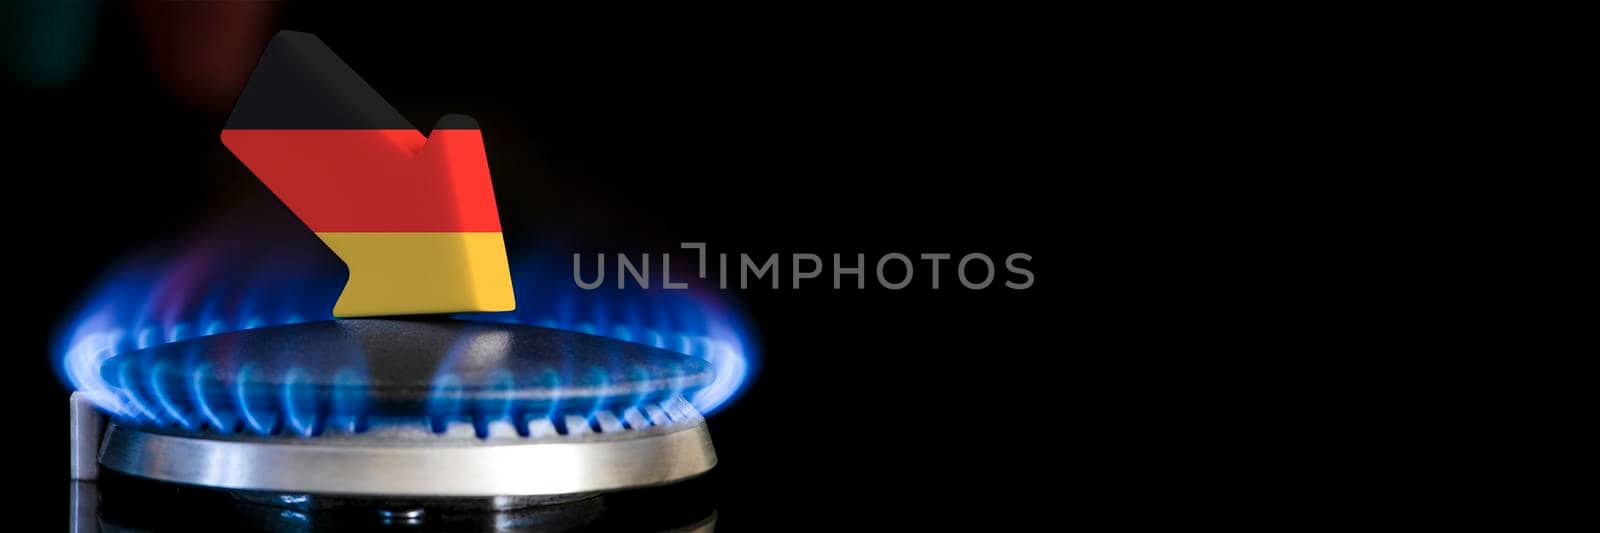 Decreased gas supplies in Germany. A gas stove with a burning flame and an arrow in the colors of the Germany flag pointing down. Concept of crisis in winter and lack of natural gas. Heating season